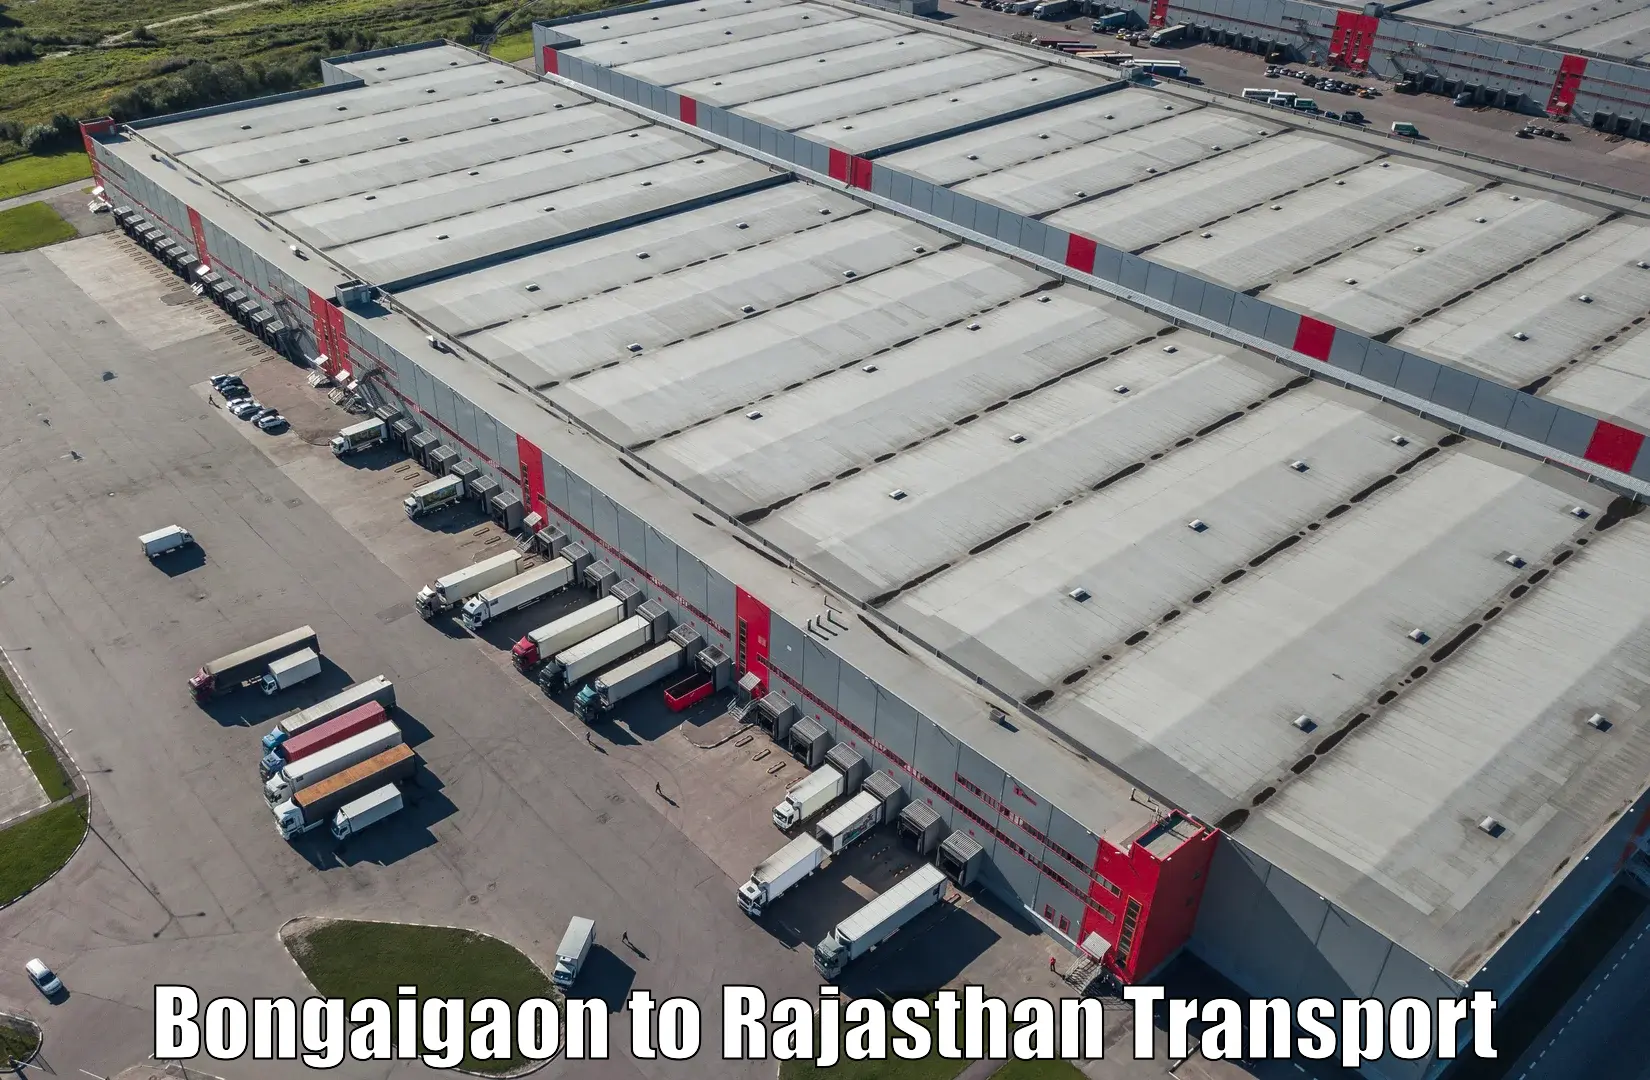 Truck transport companies in India Bongaigaon to Ghatol